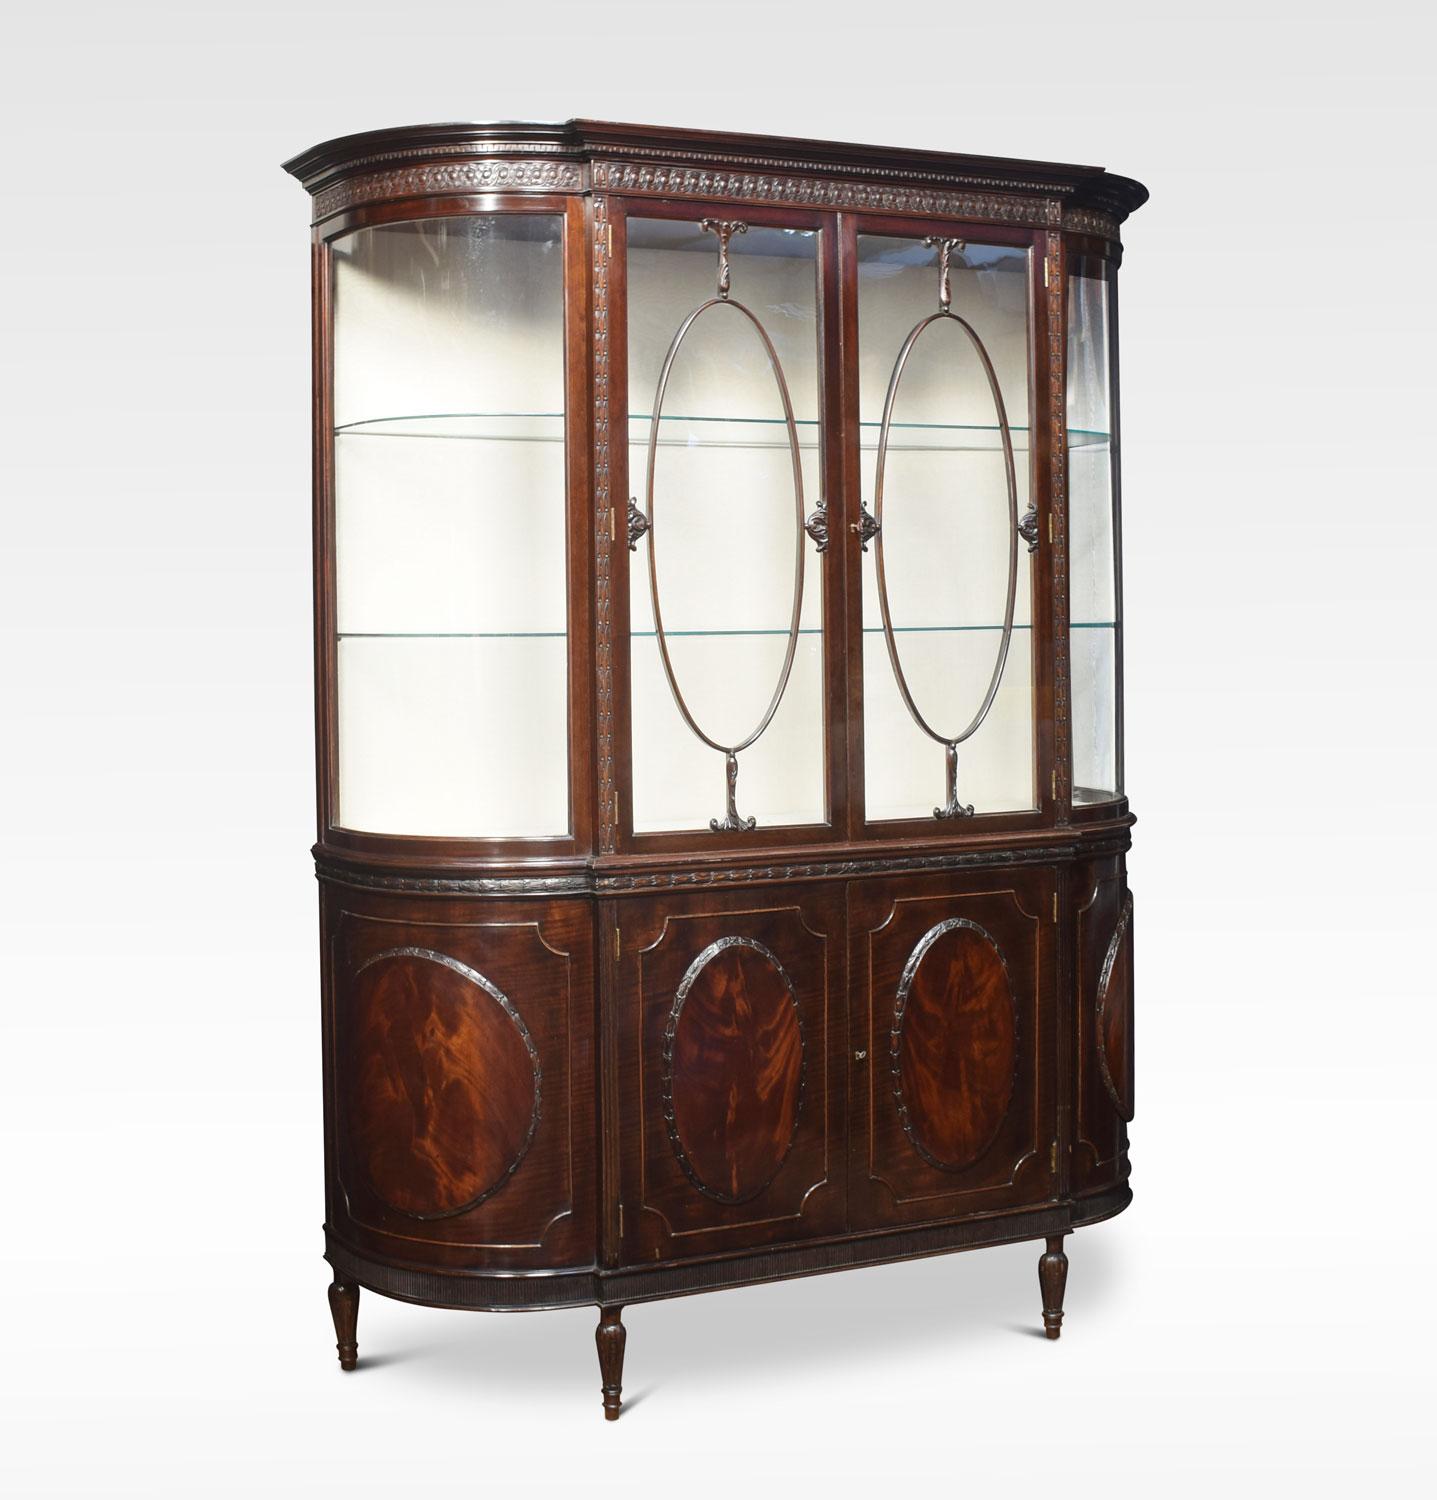 Mahogany bow ended display cabinet the cornice having Greek Key moldings above two large rectangular doors, flanked by two bowed glazed sides. The base section having four flame mahogany oval panels with two central doors enclosing large storage